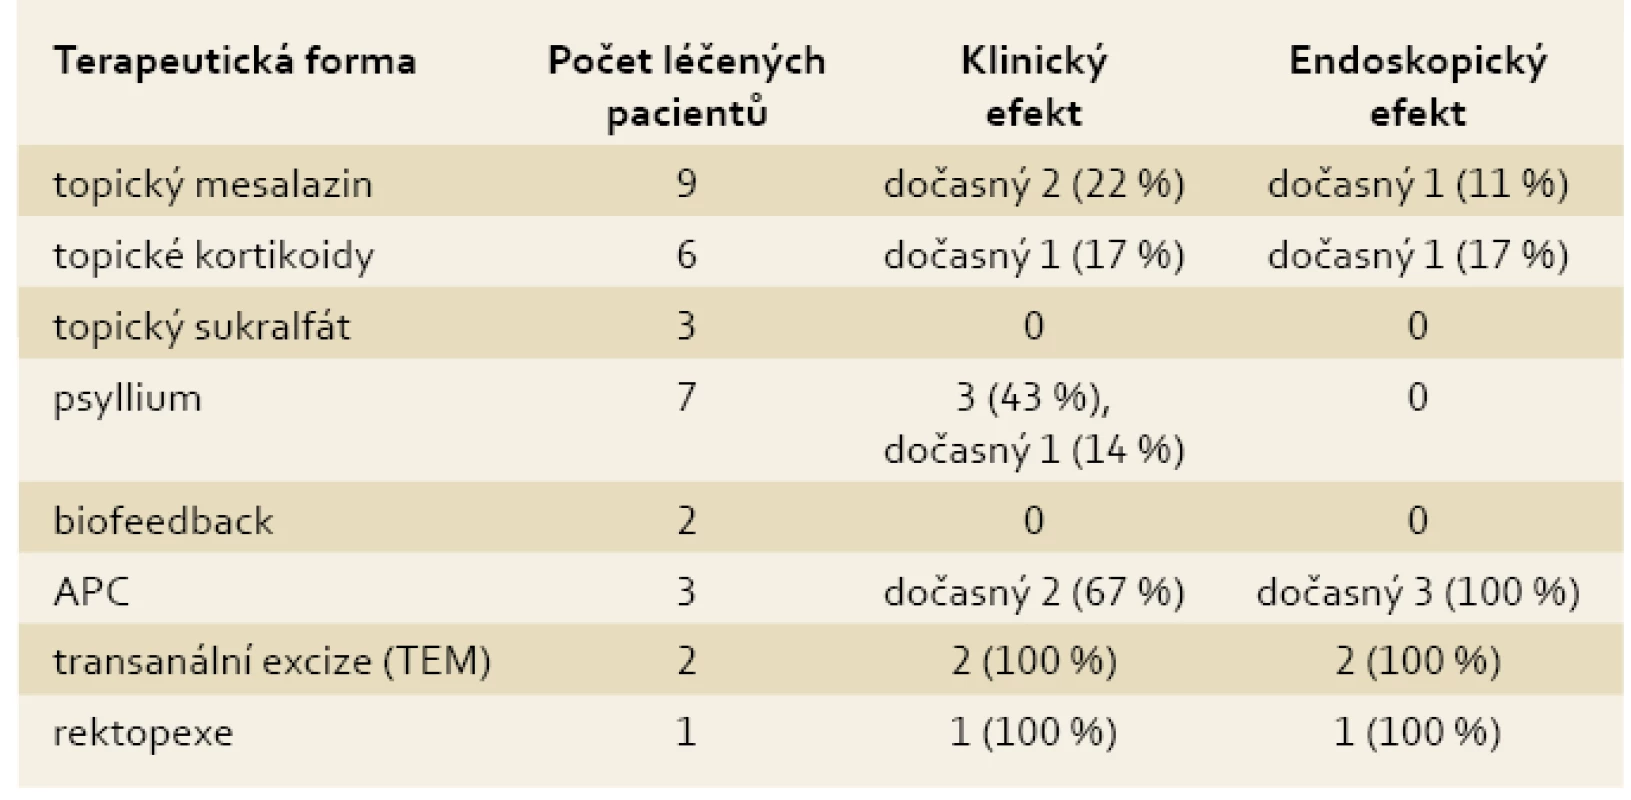 Terapeutické výsledky u 11 pacientů se SRUS.
Tab. 5. Therapeutic results in 11 patients with SRUS.